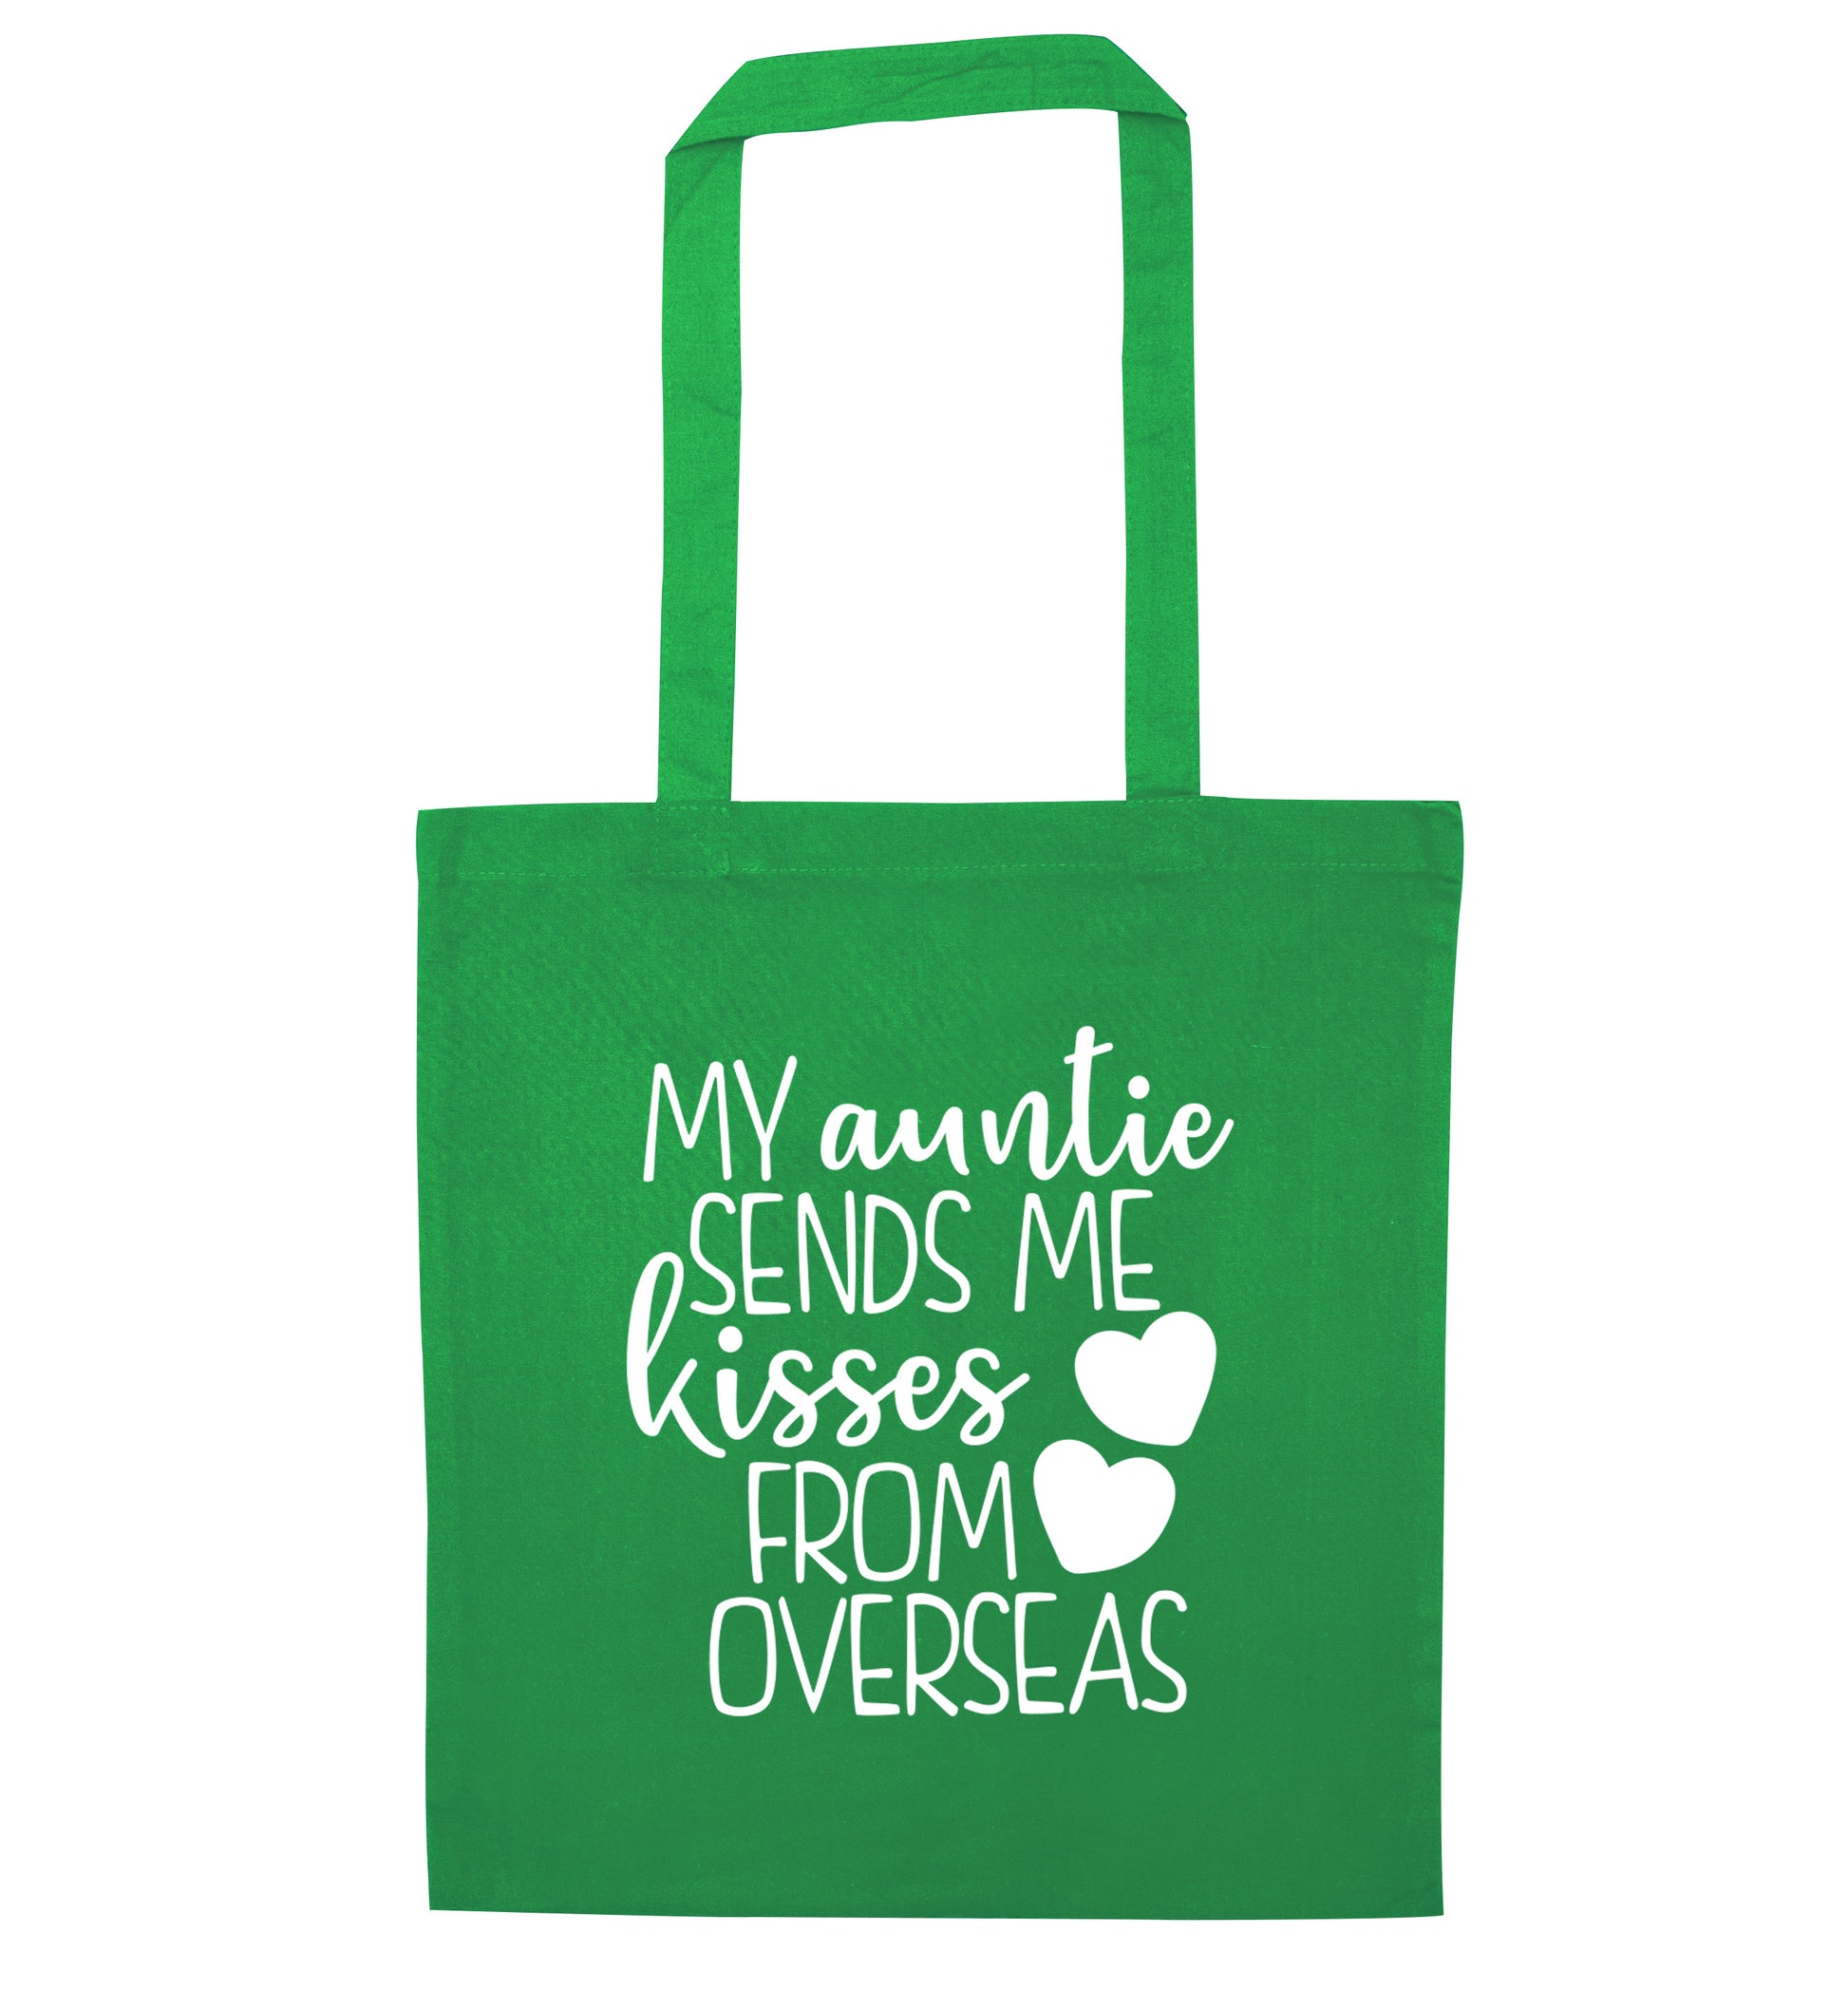 My auntie sends me kisses from overseas green tote bag